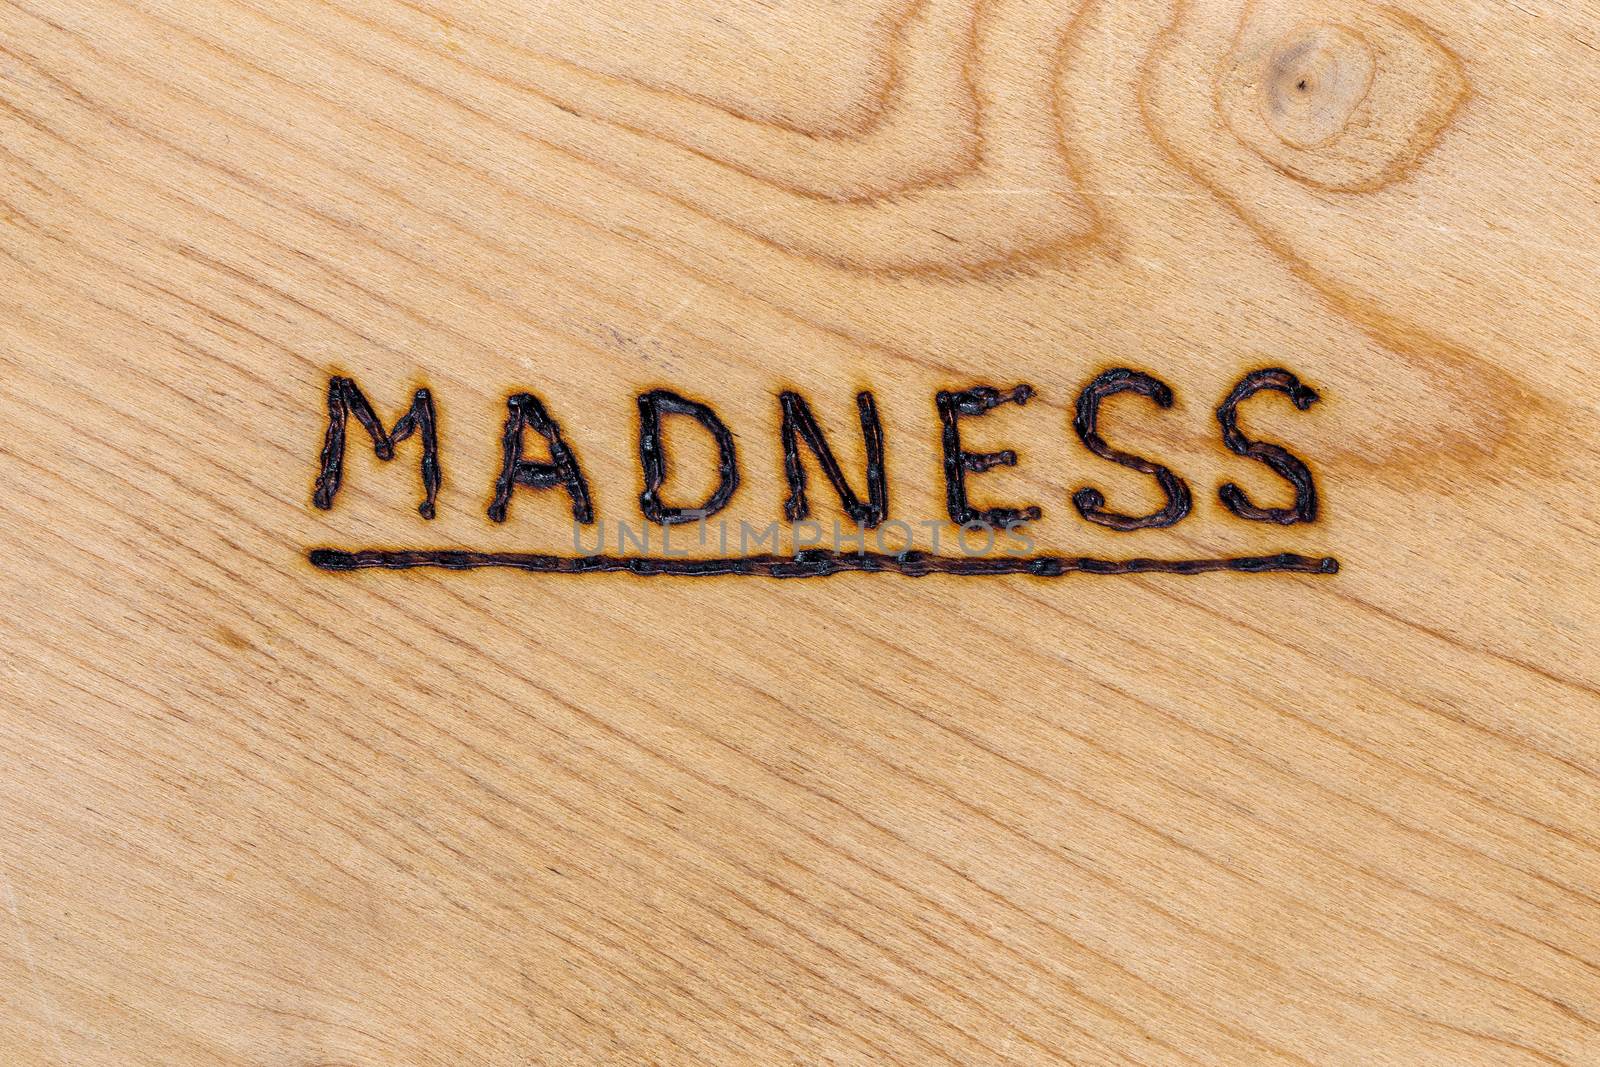 the underlined word madness handwritten with woodburner on flat plywood surface in flat lay directly above view.